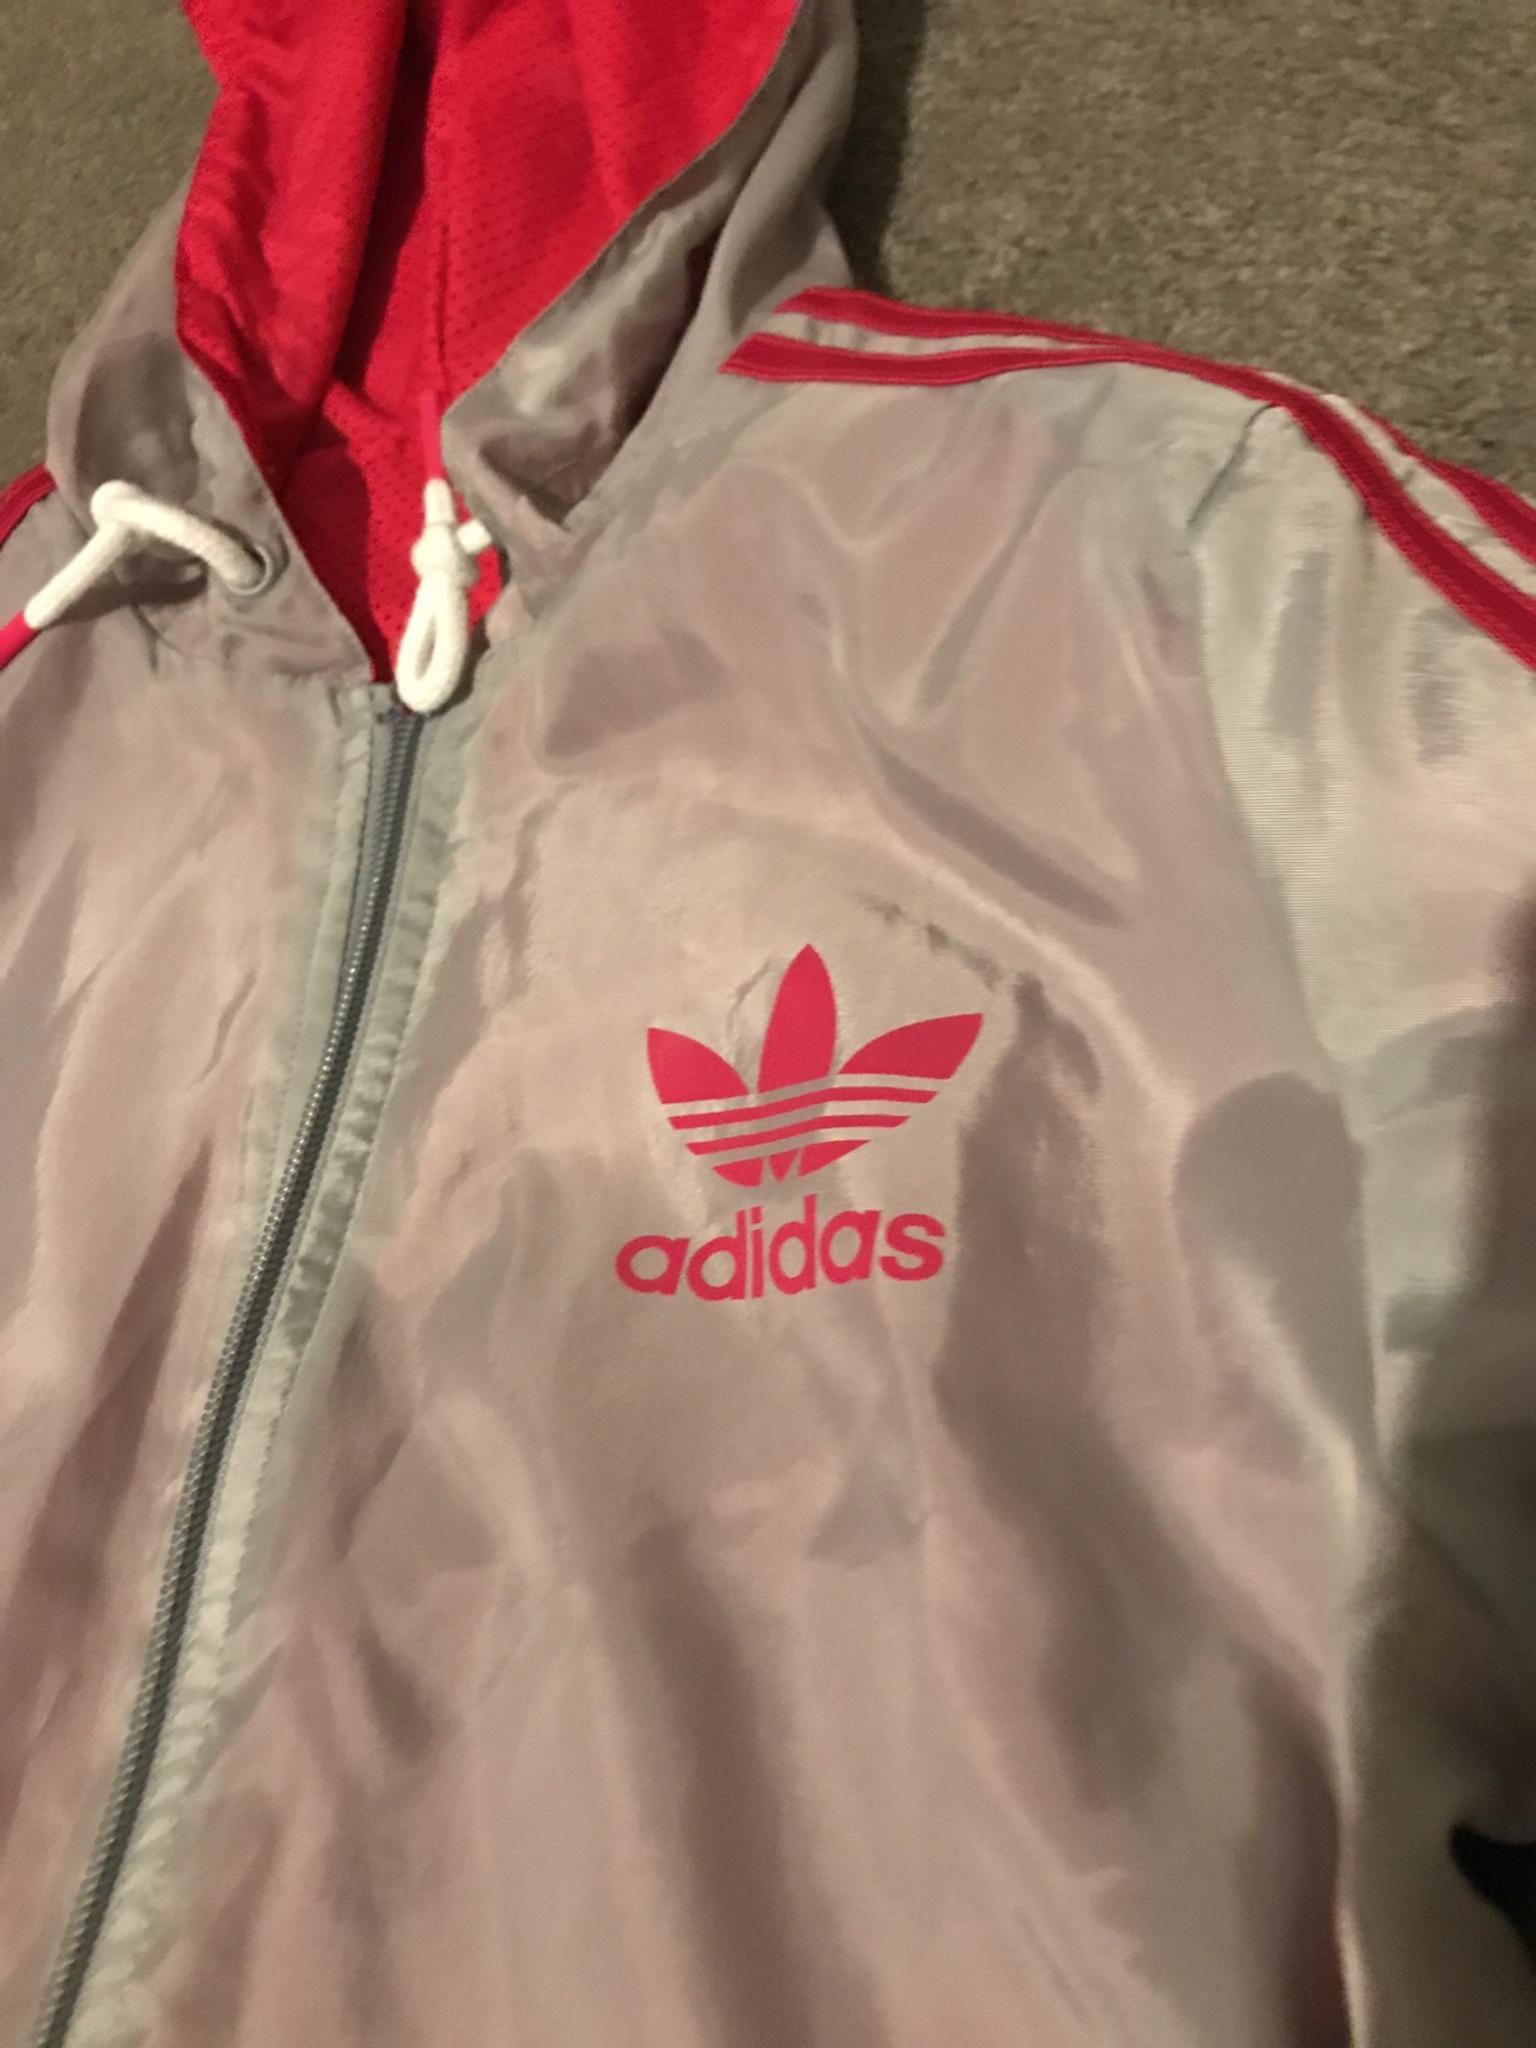 pink grey and white adidas jumper